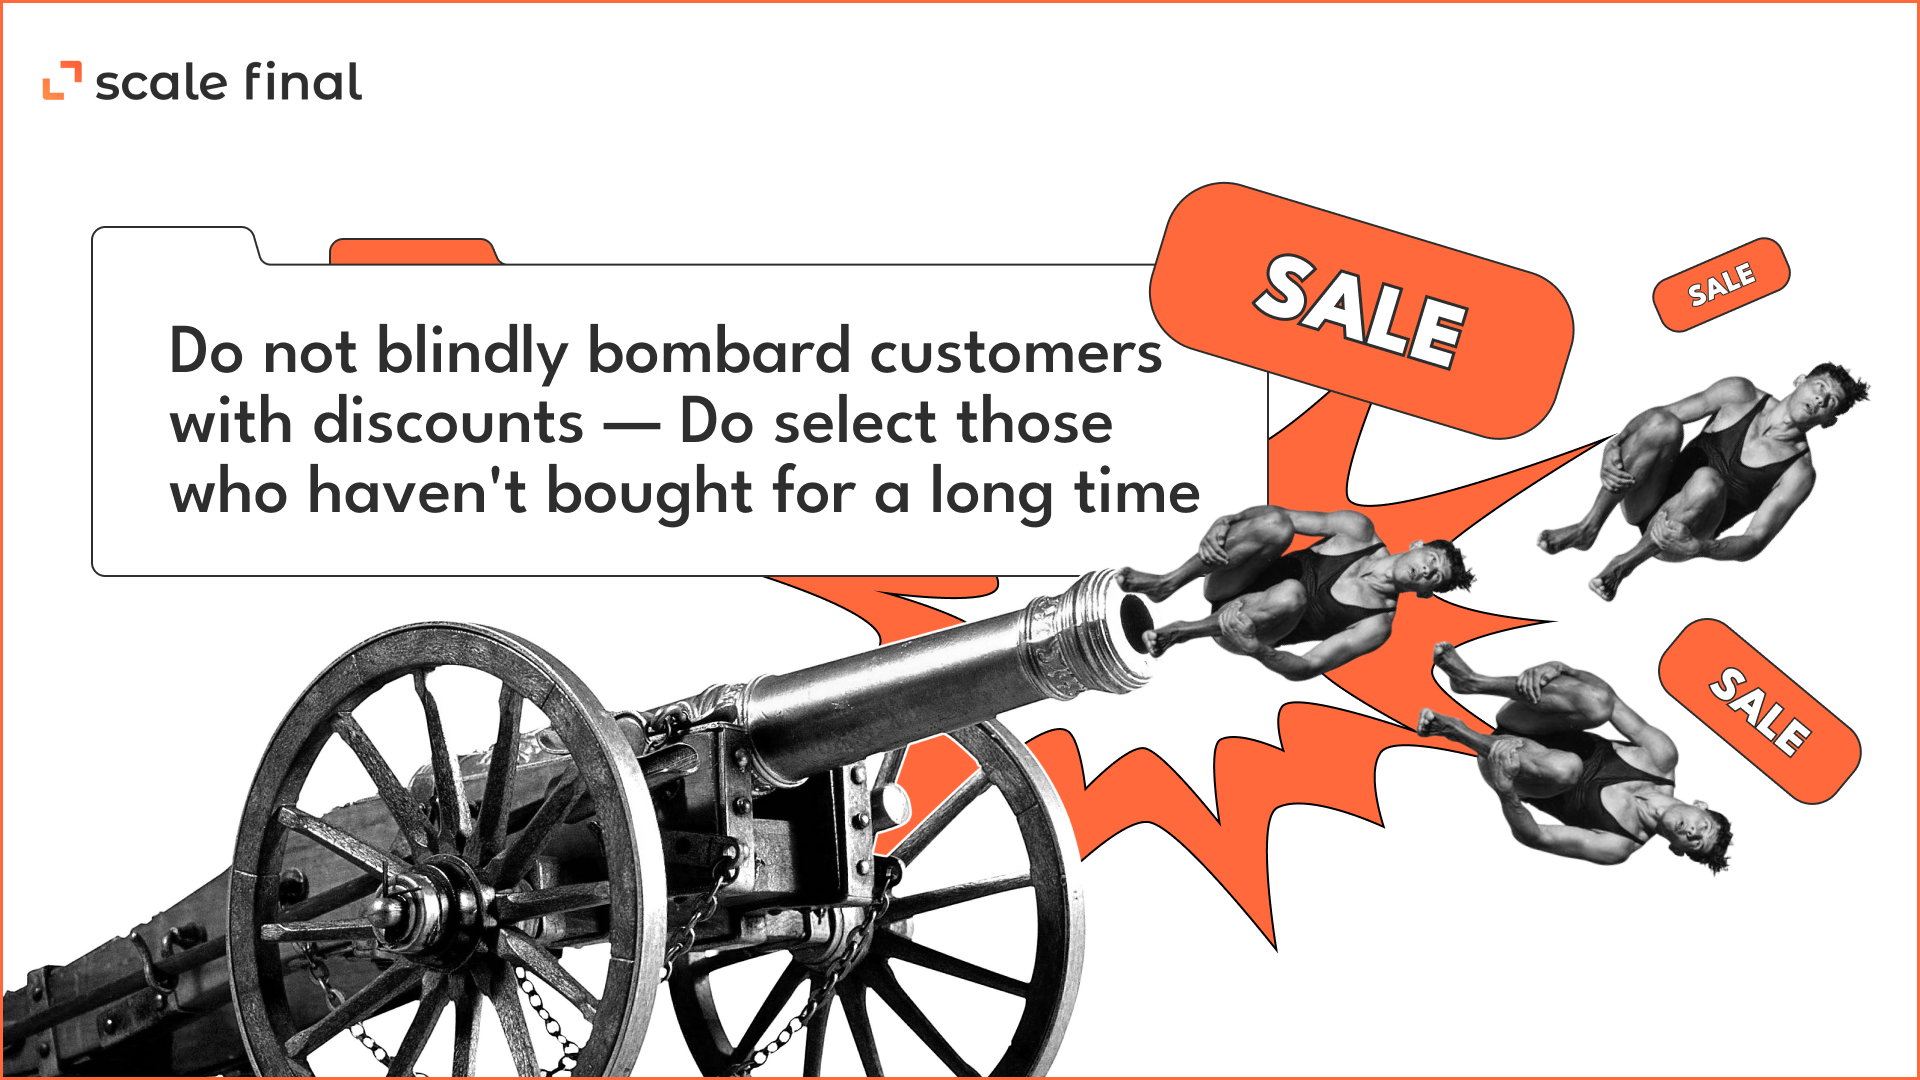 Do not blindly bombard customers with discounts 
Do select those who haven't bought for a long time